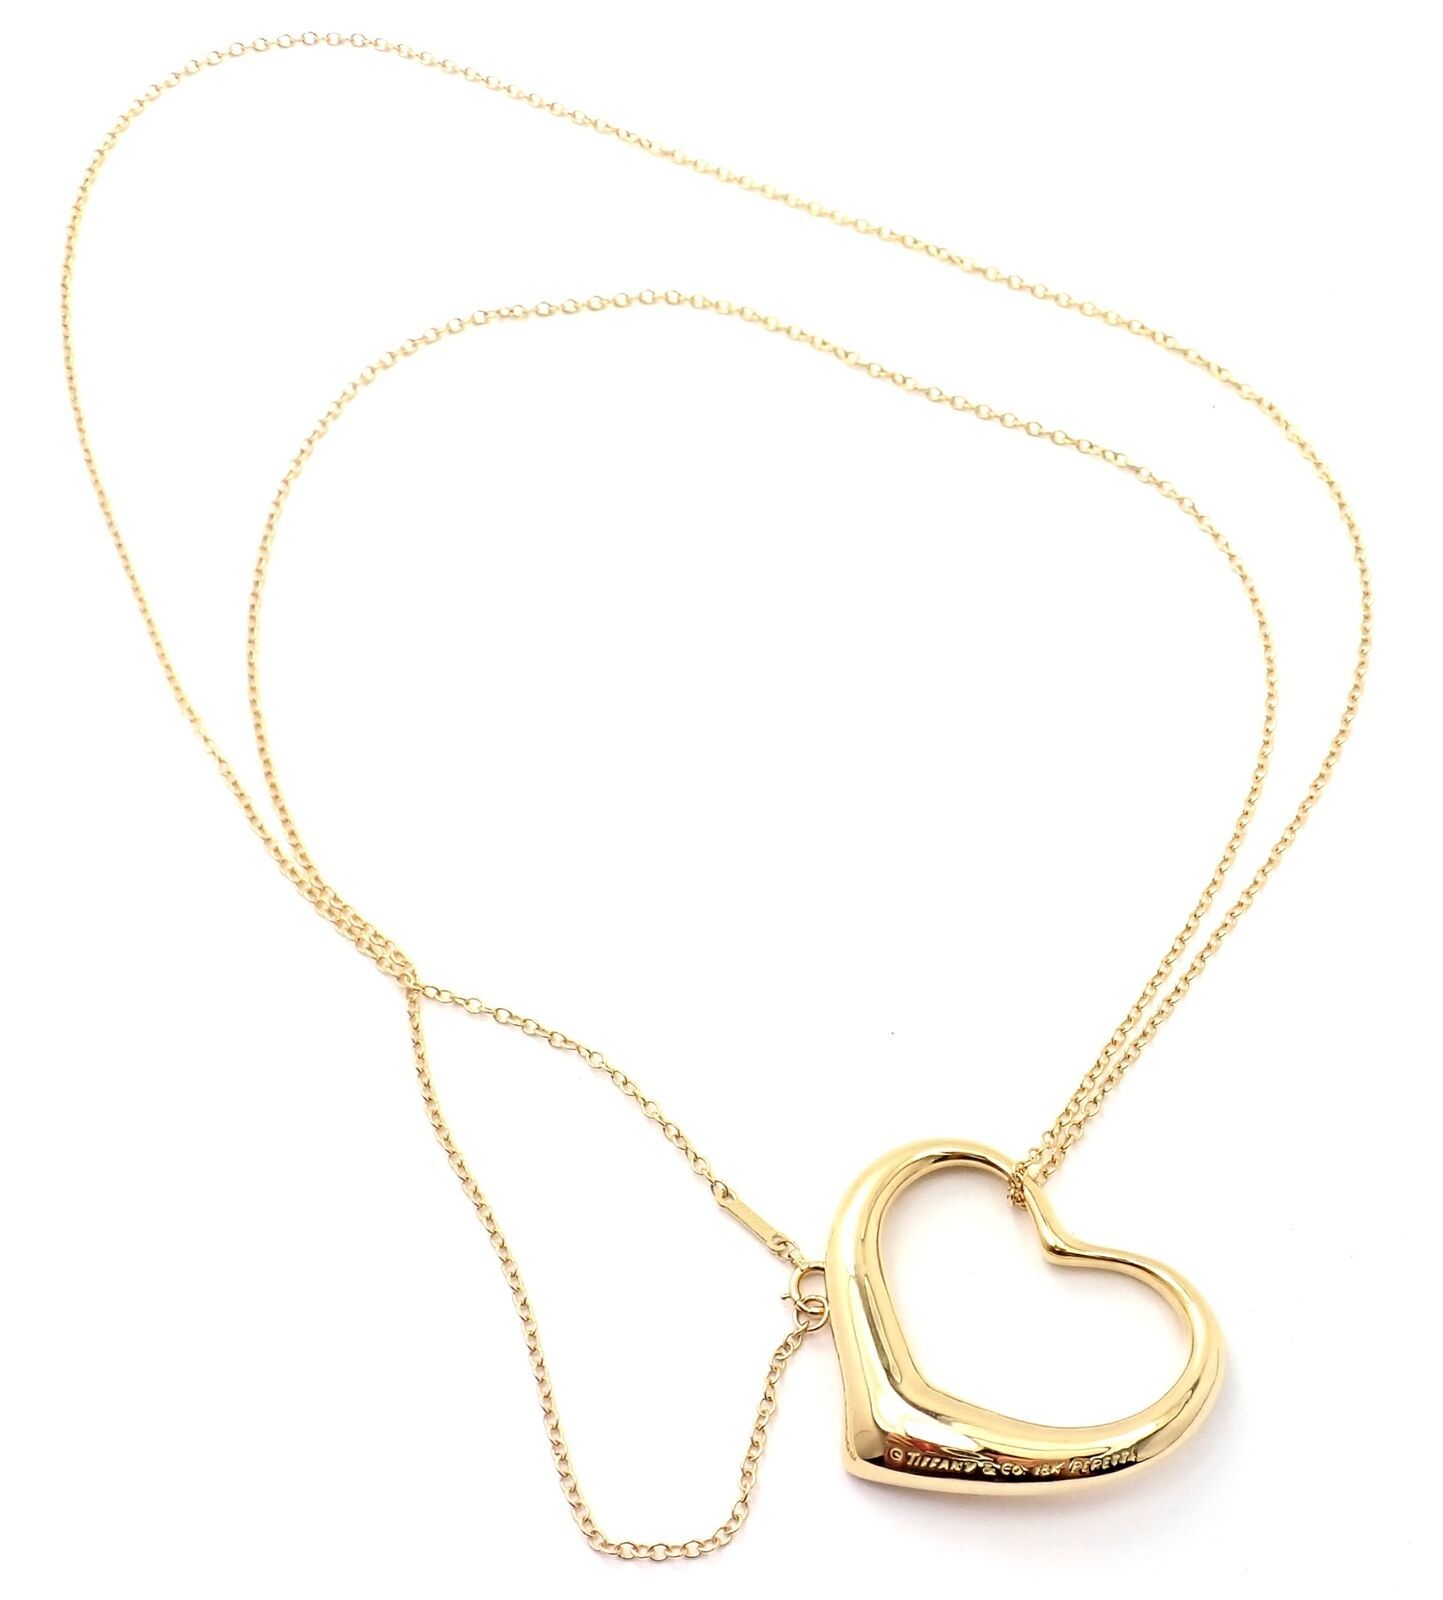 Primary image for Tiffany & Co 18k Yellow Gold Peretti Extra Large Open Heart Pendant 30" Necklace